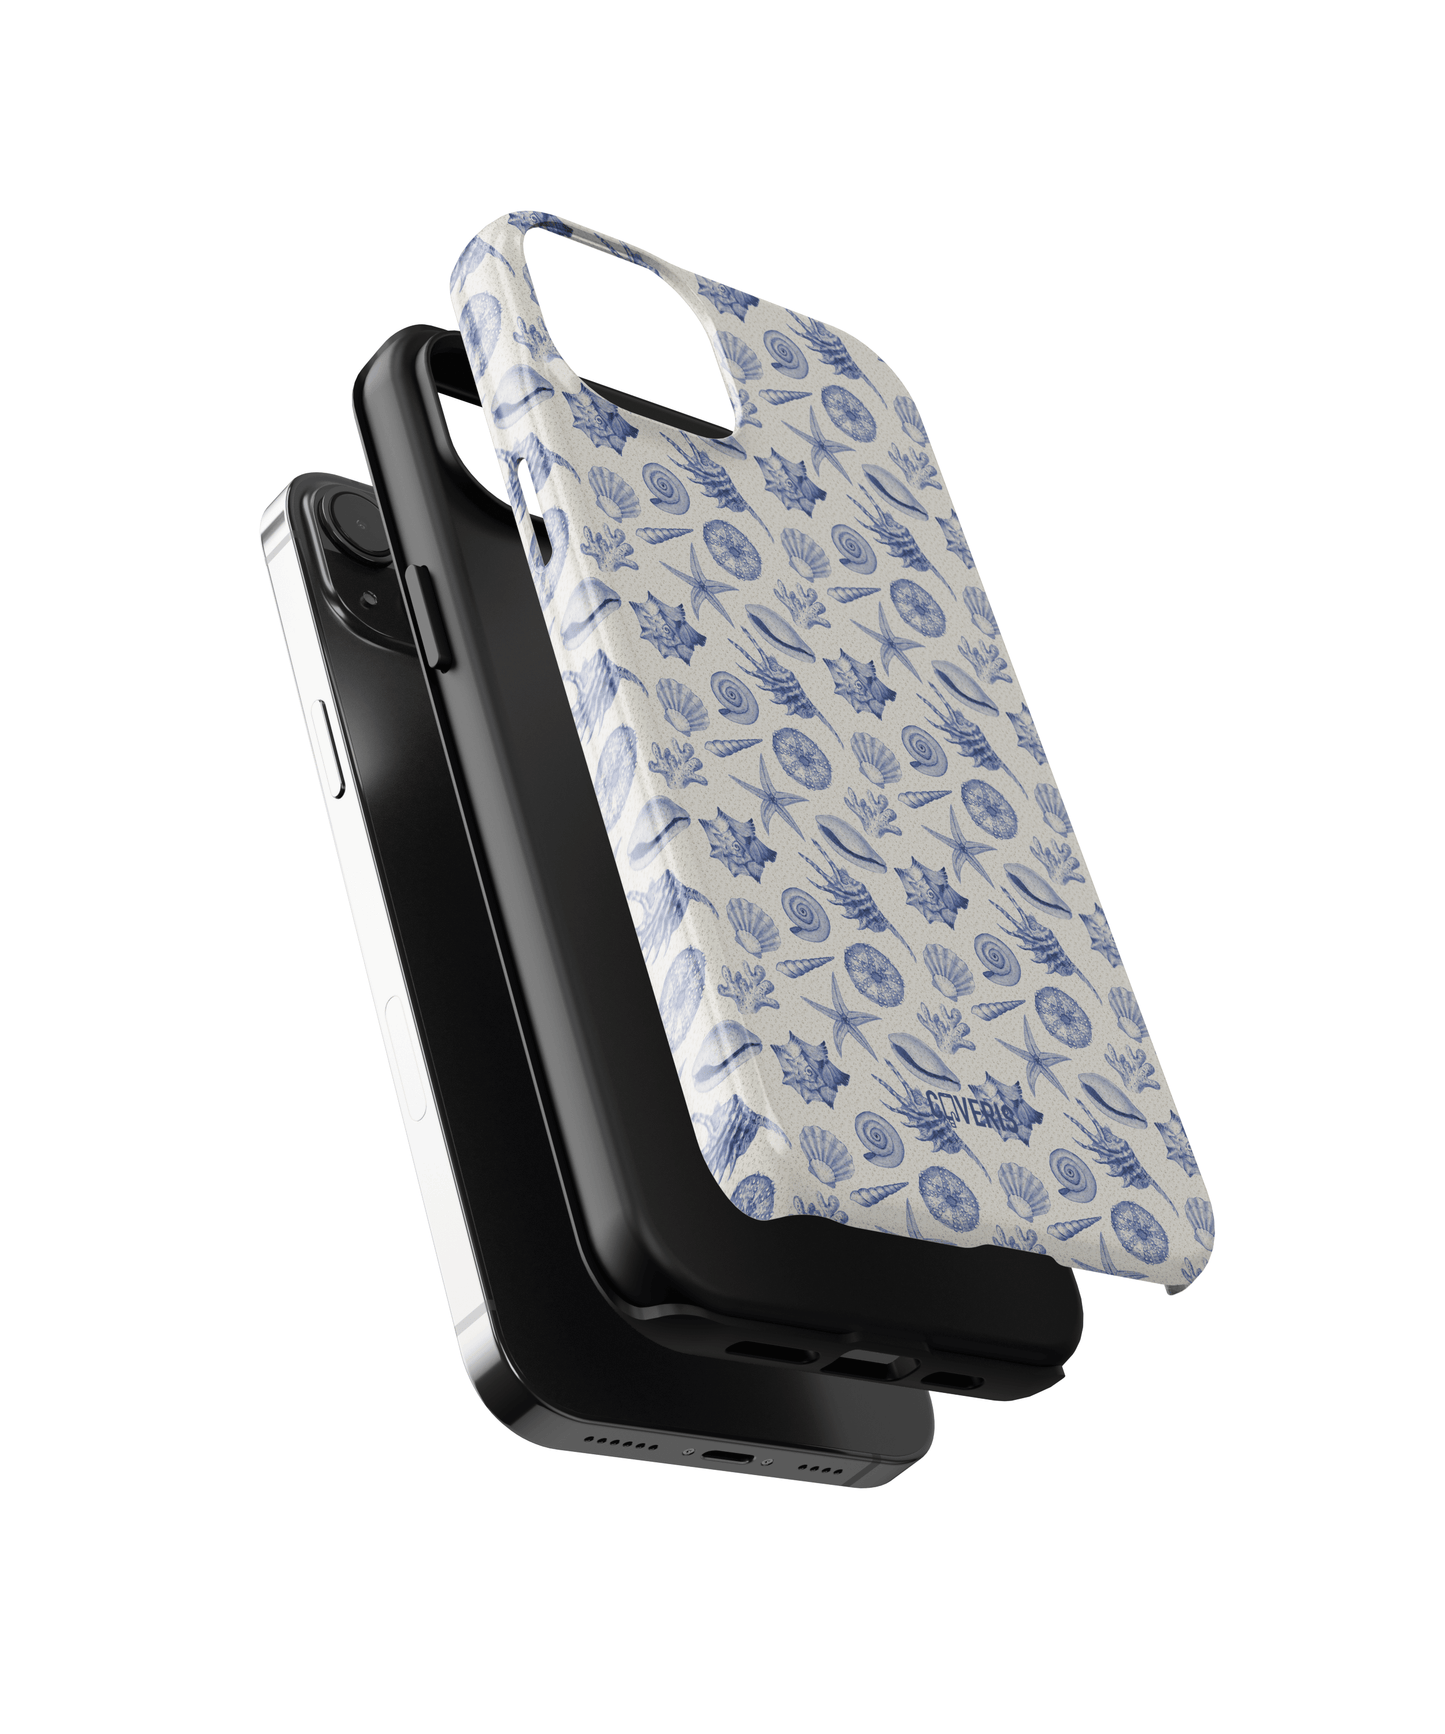 Shelluxe - iPhone 13 Pro max phone case